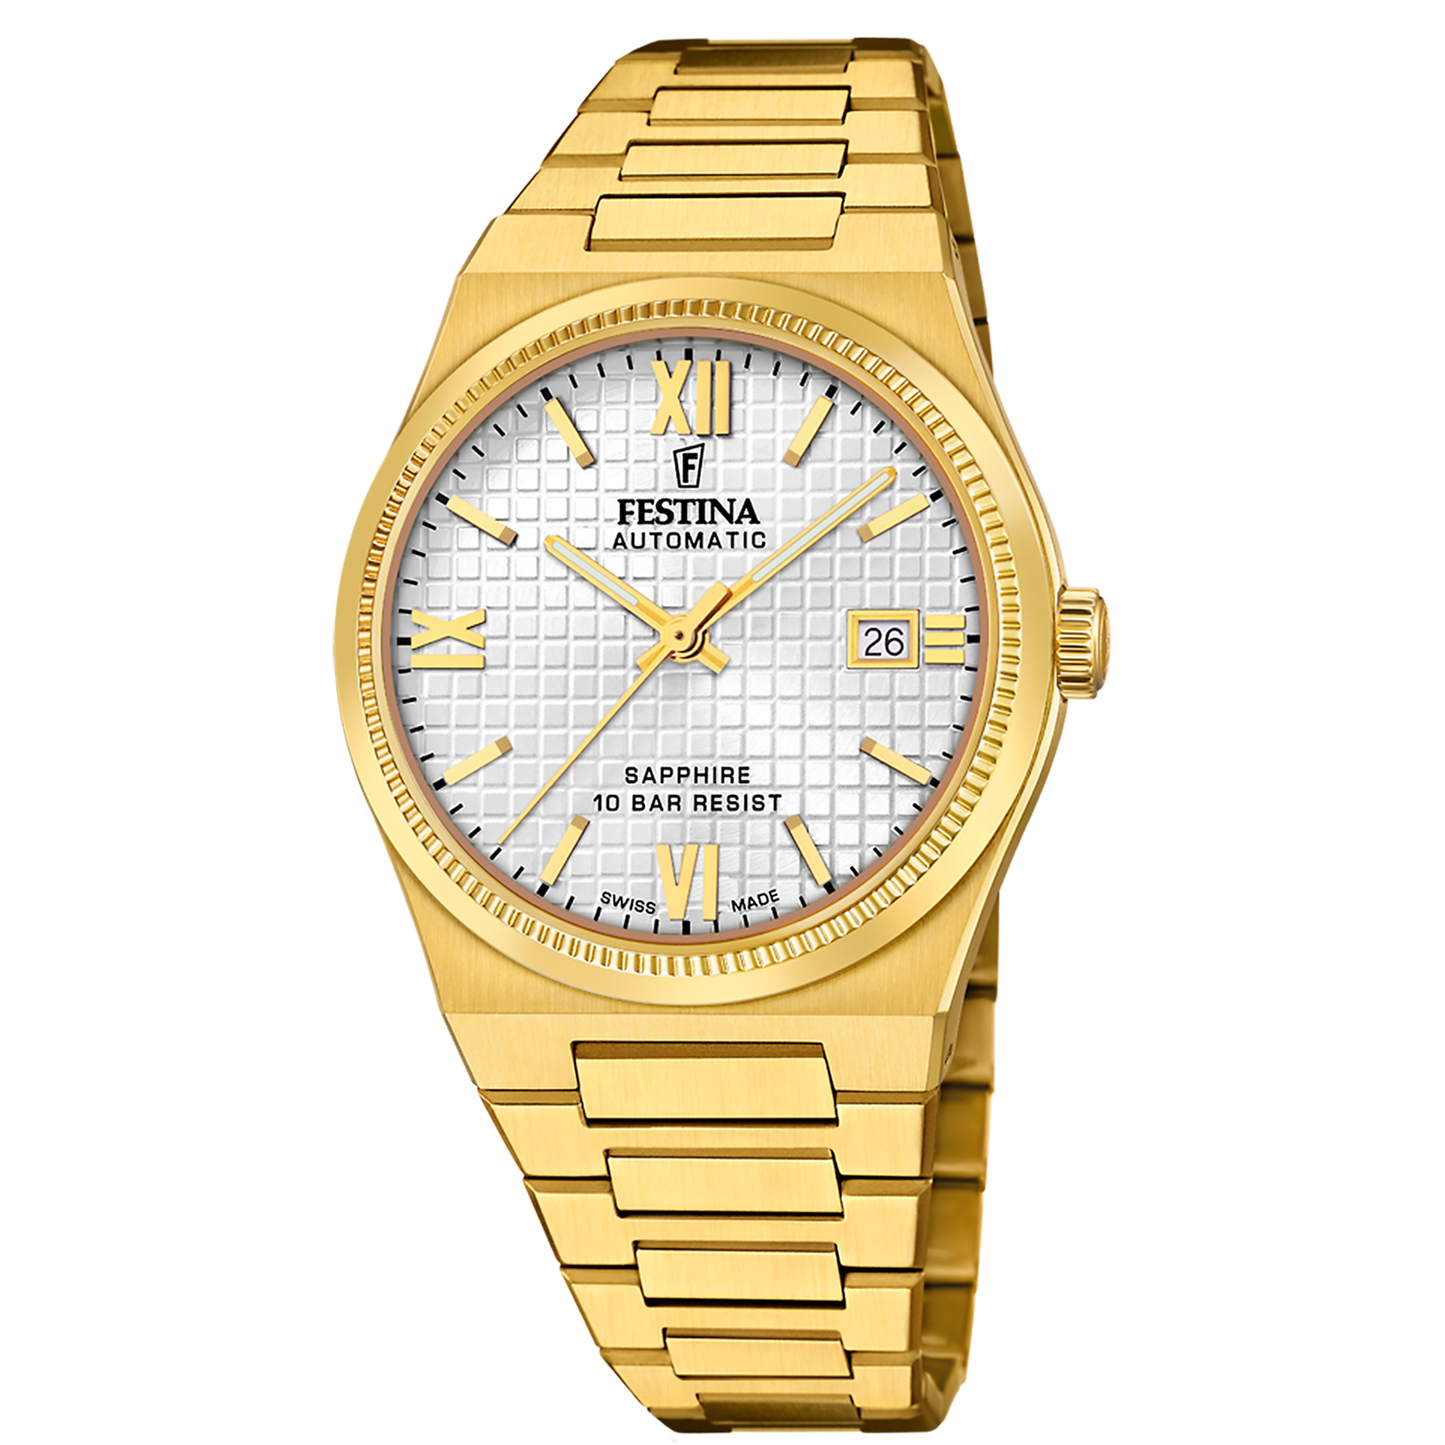 Festina Swiss Made F20032-1 - Analog - Strap Material Stainless Steel I Festina Watches USA